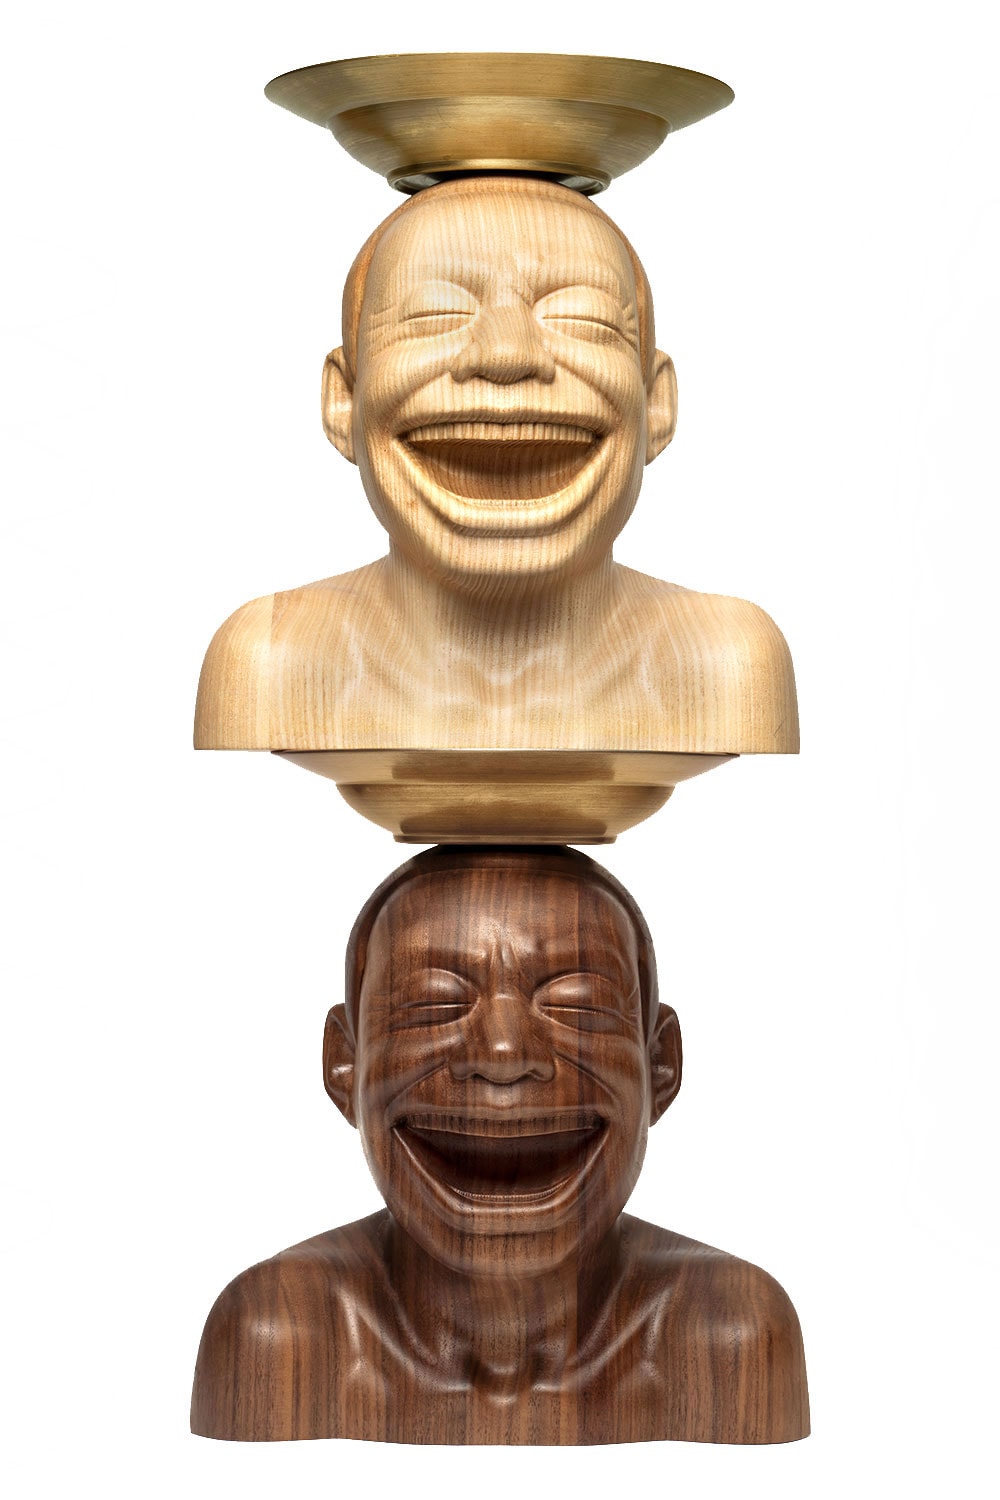 Yue Minjun Surplus Value Sculpture Release chinese contemporary artists smile marxism 